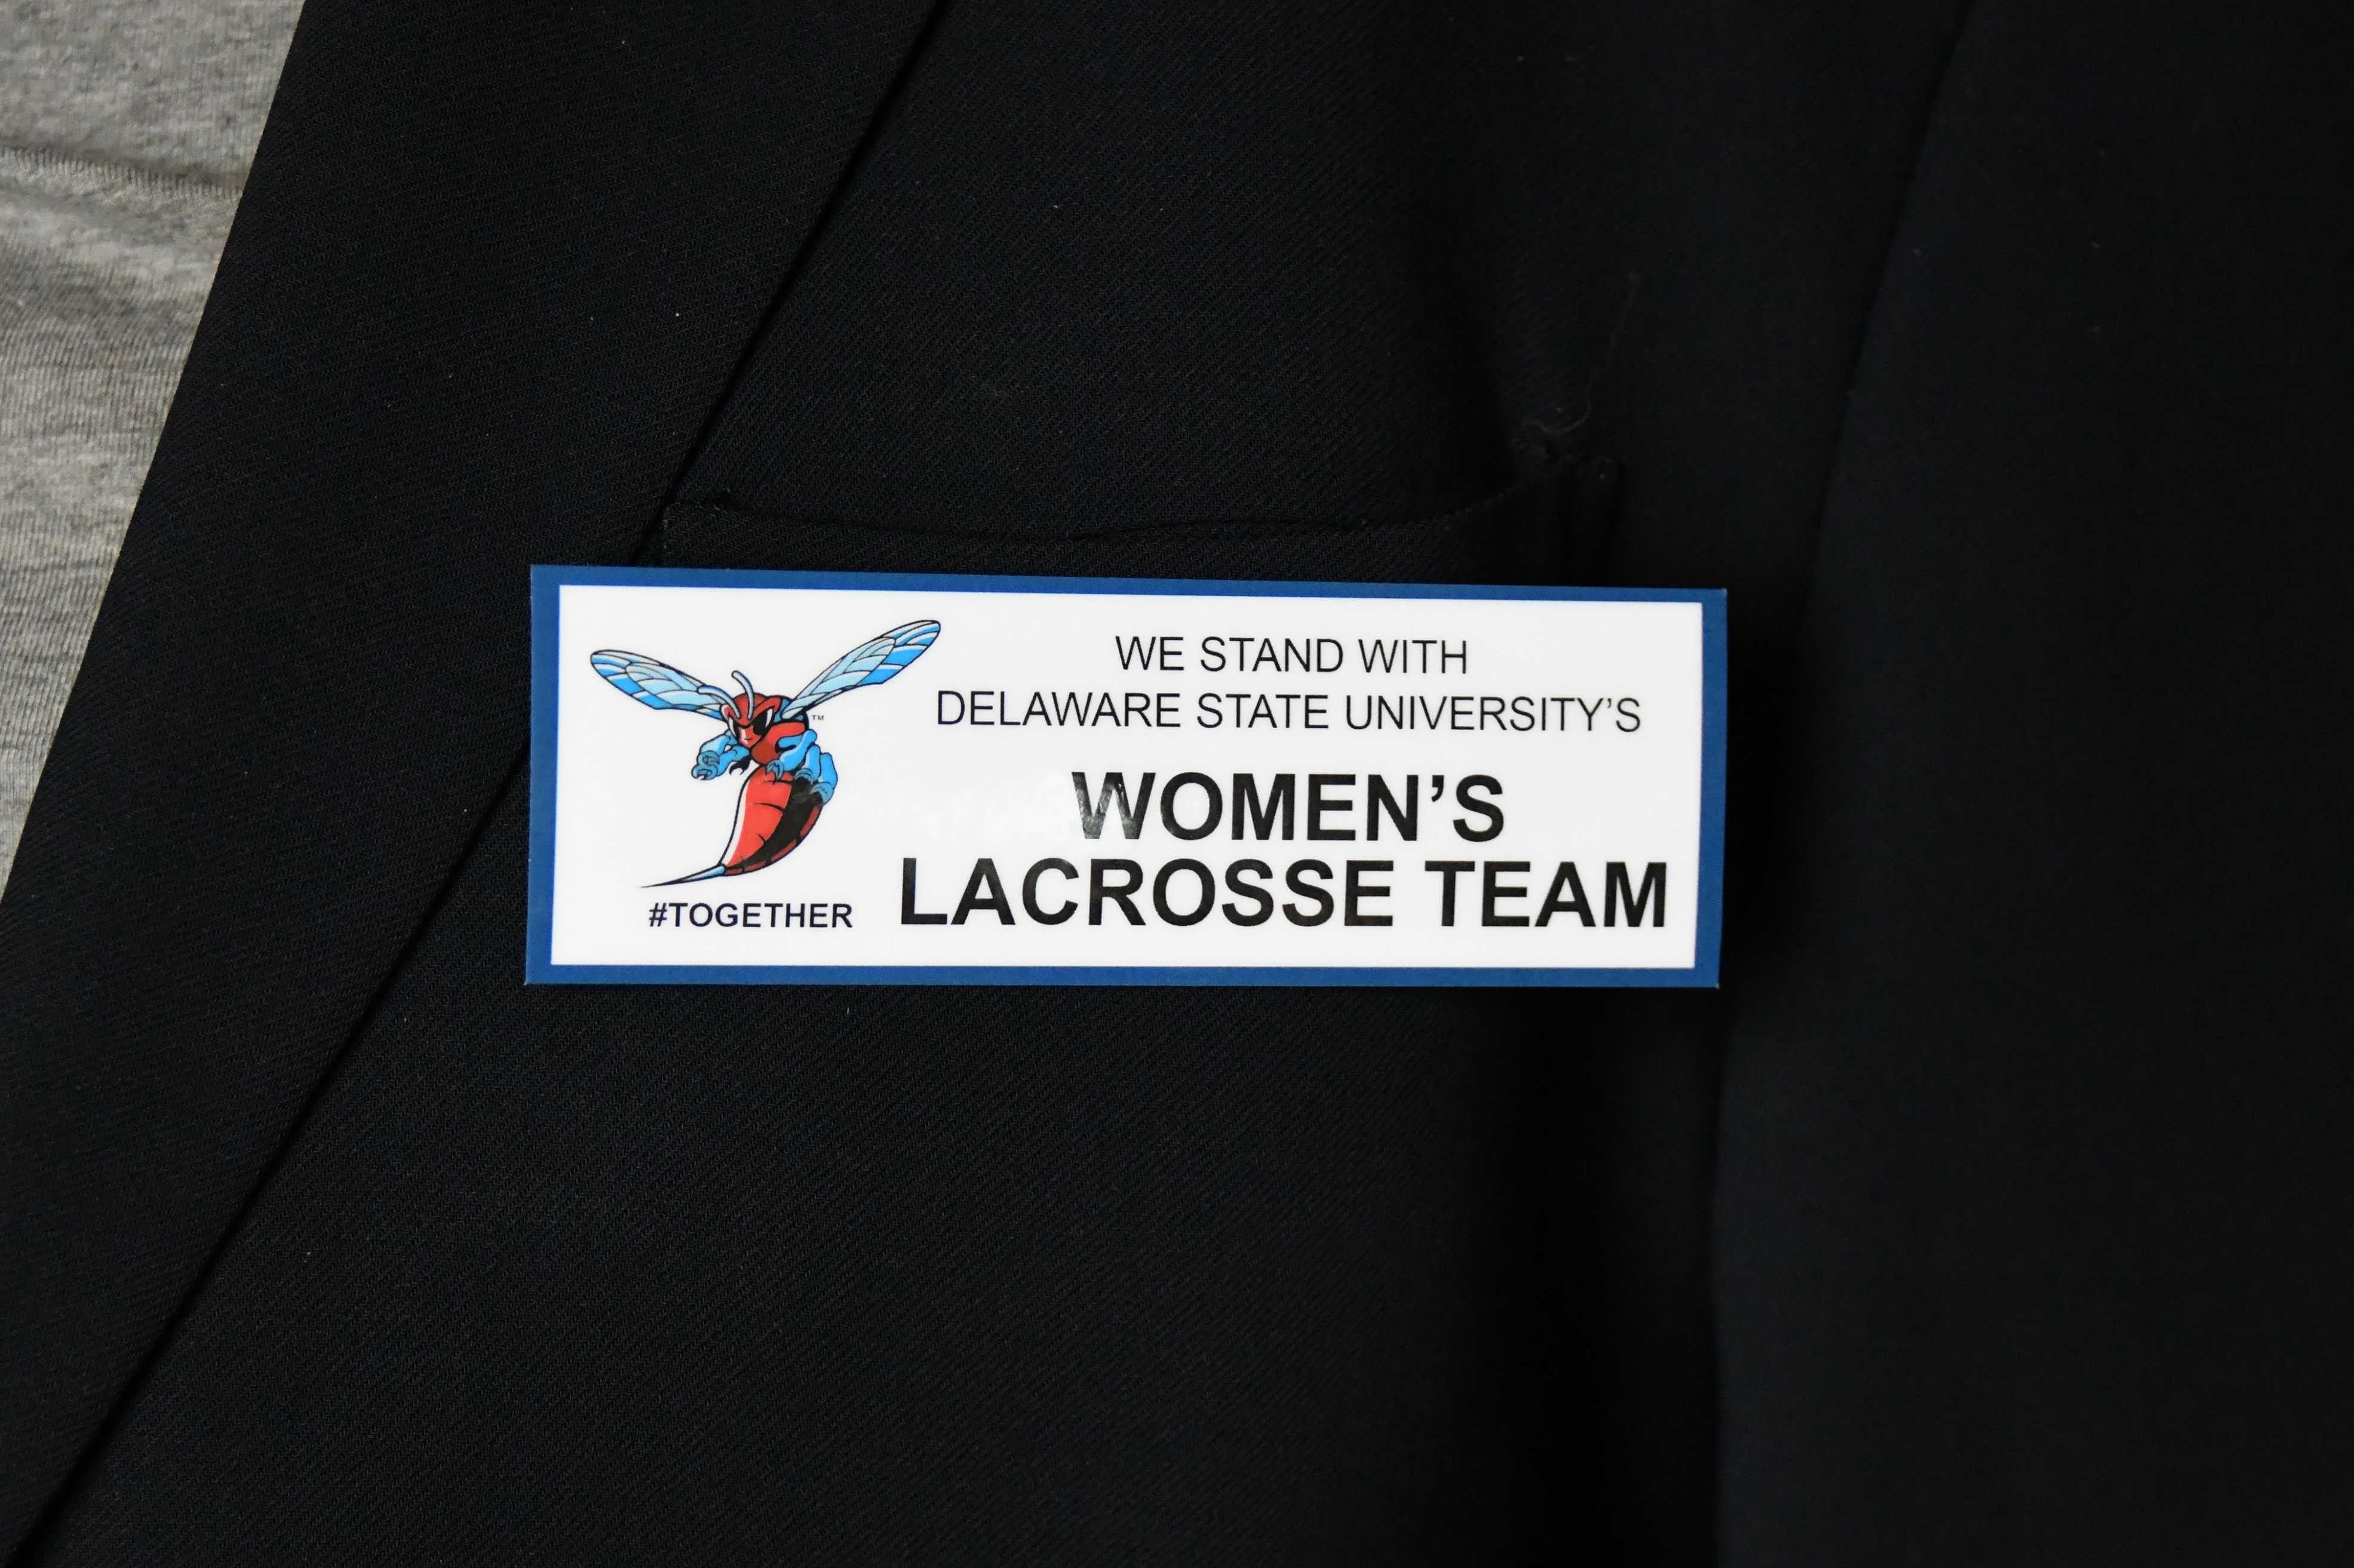 The pictured badge was worn by commencement speakers and workers in solidarity with the Women's Lacrosse team, which was subjected to an improper stop and search in Georgia by the Liberty County Sheriff's Department.